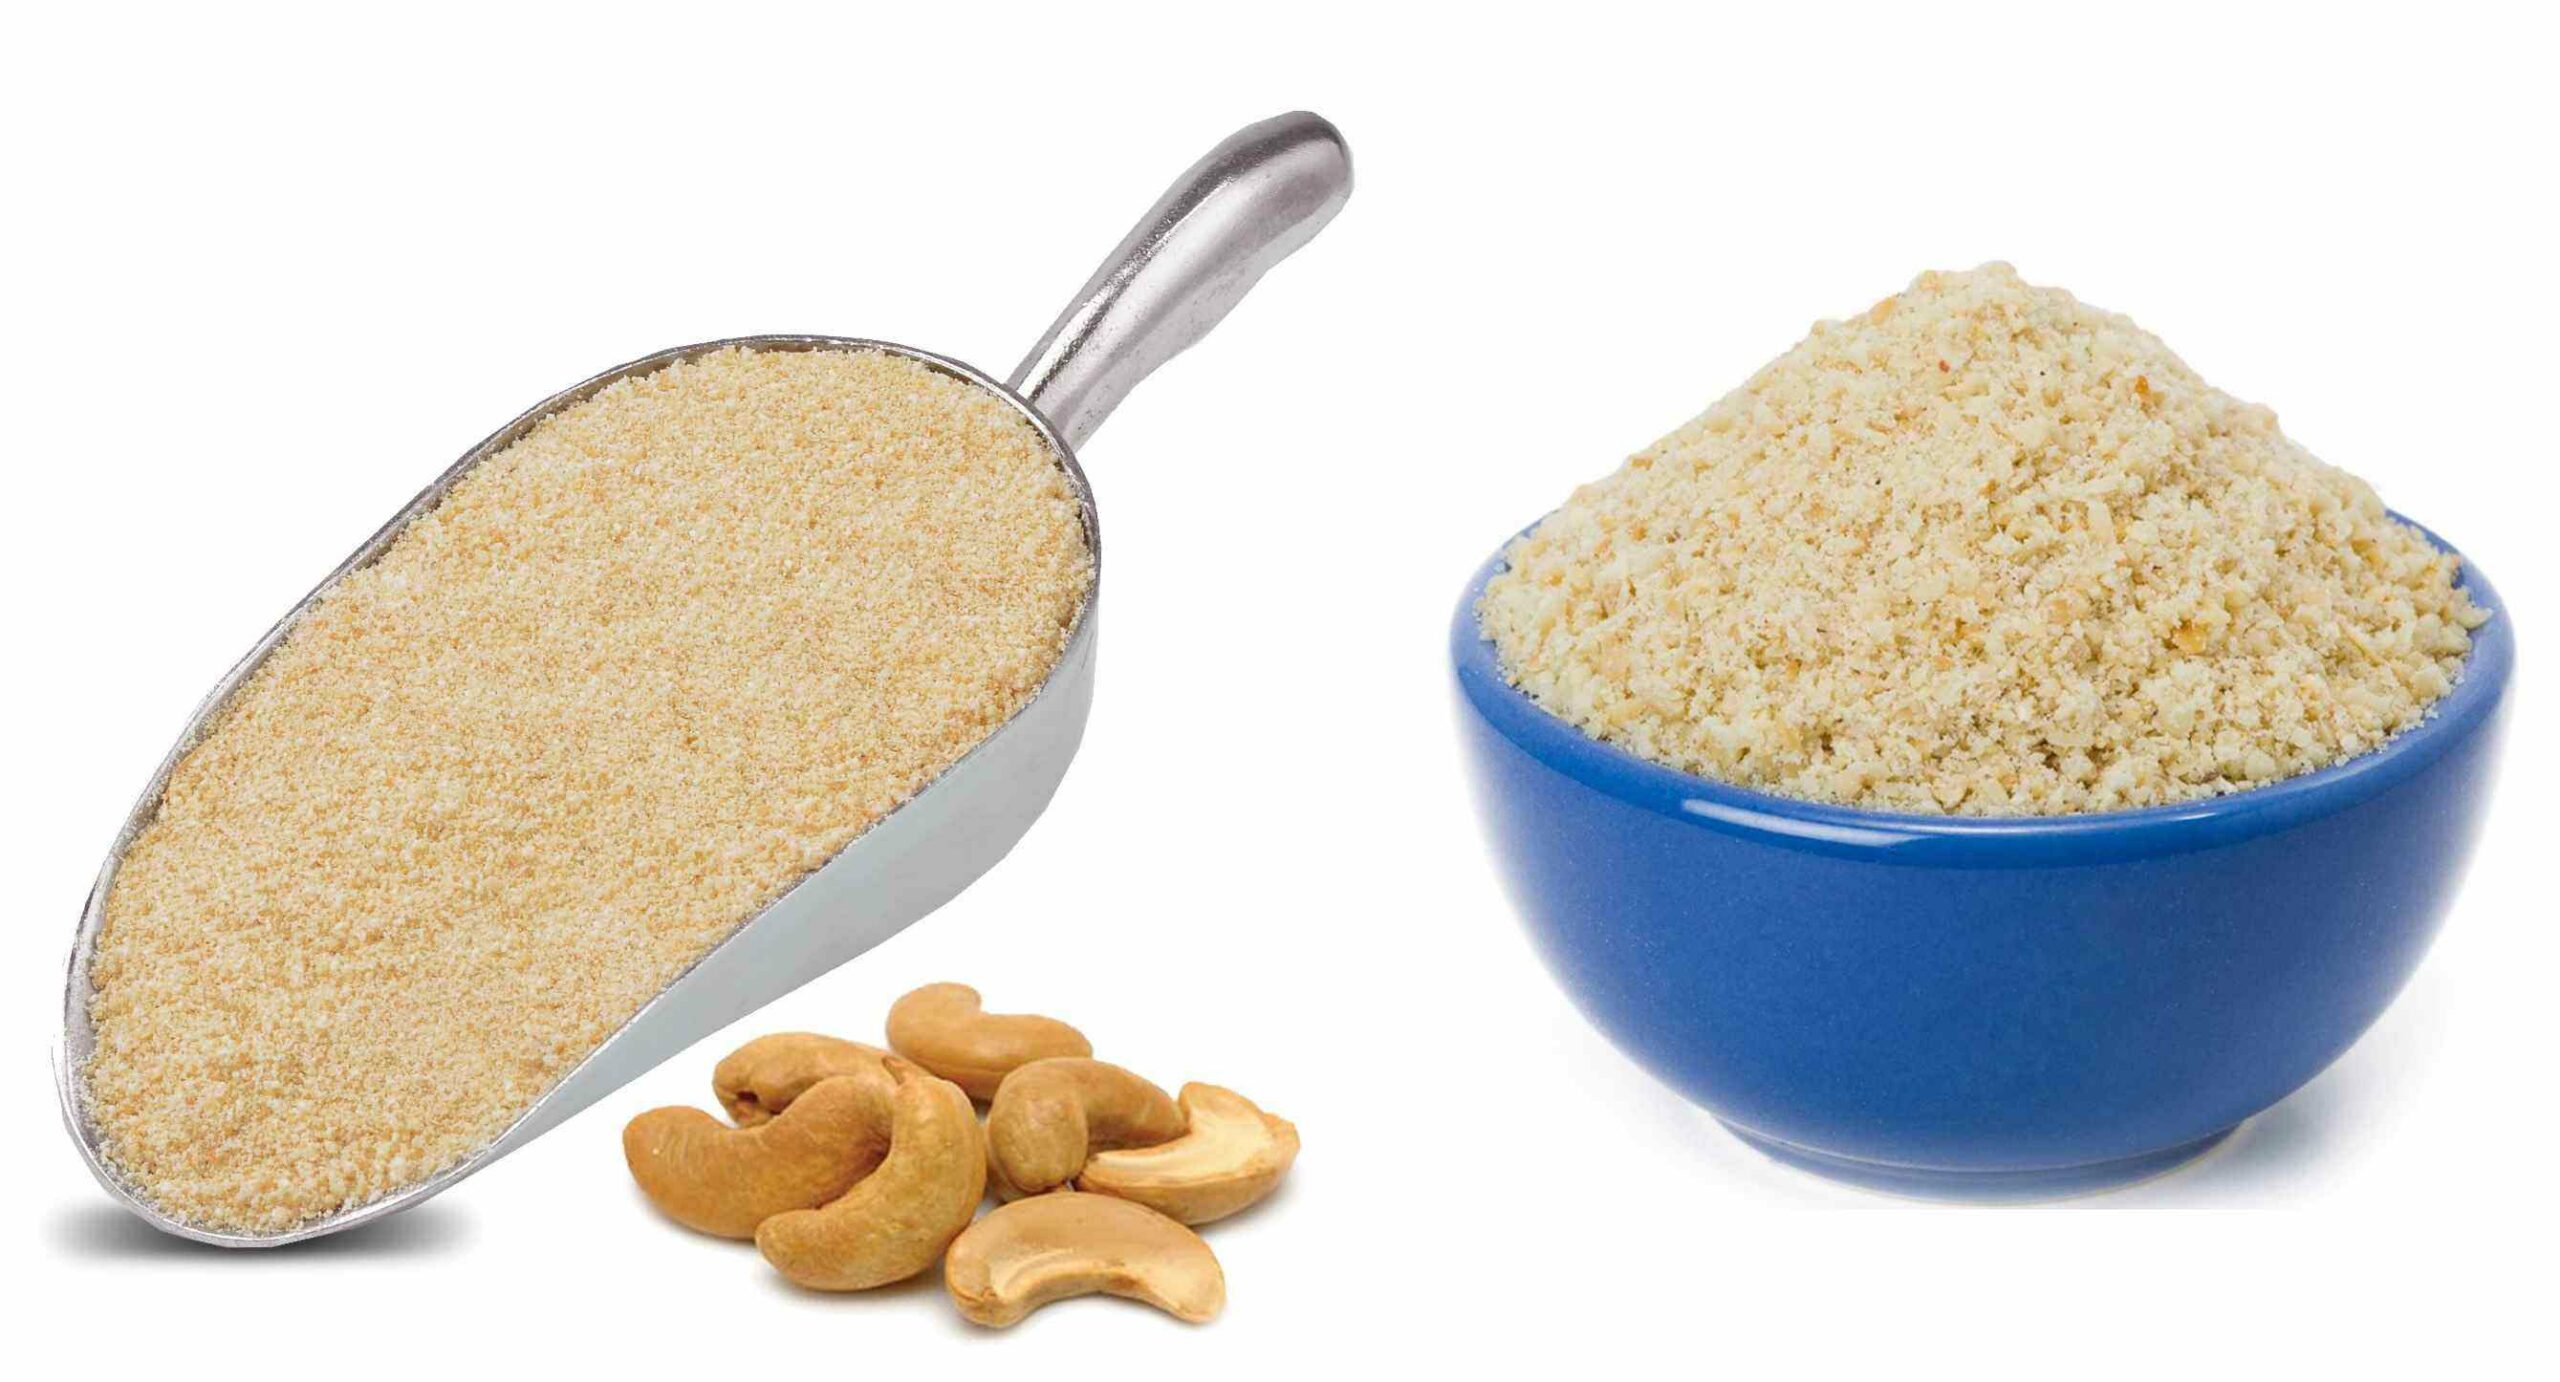 Cashew Powder is derived from Cashew kernels that have been shelled, blanched, roasted, and ground into Flour.